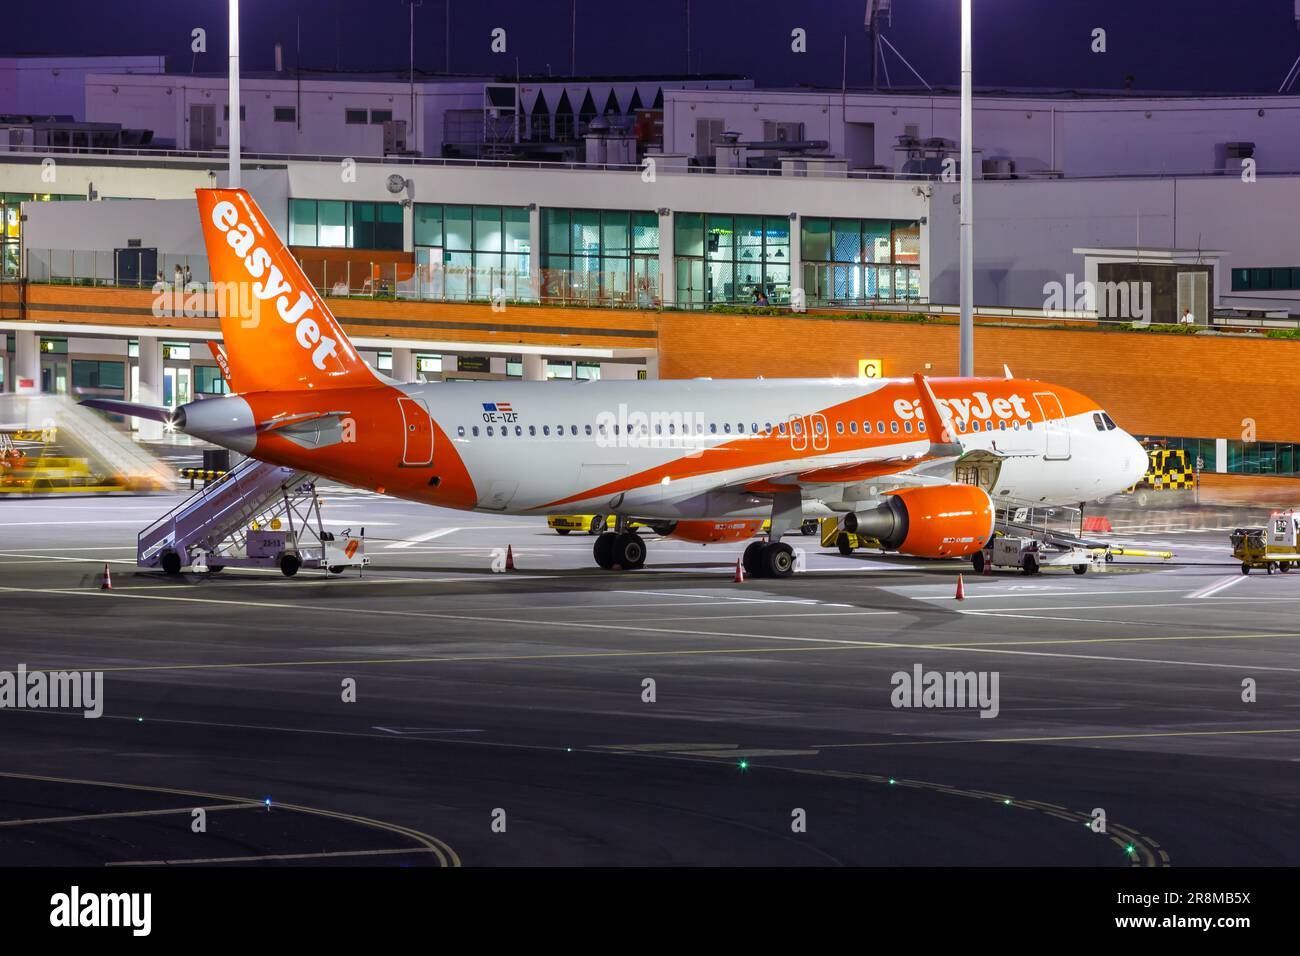 Madeira, Portugal - September 12, 2022: EasyJet Airbus A320 airplane at Madeira Airport (FNC) in Portugal. Stock Photo